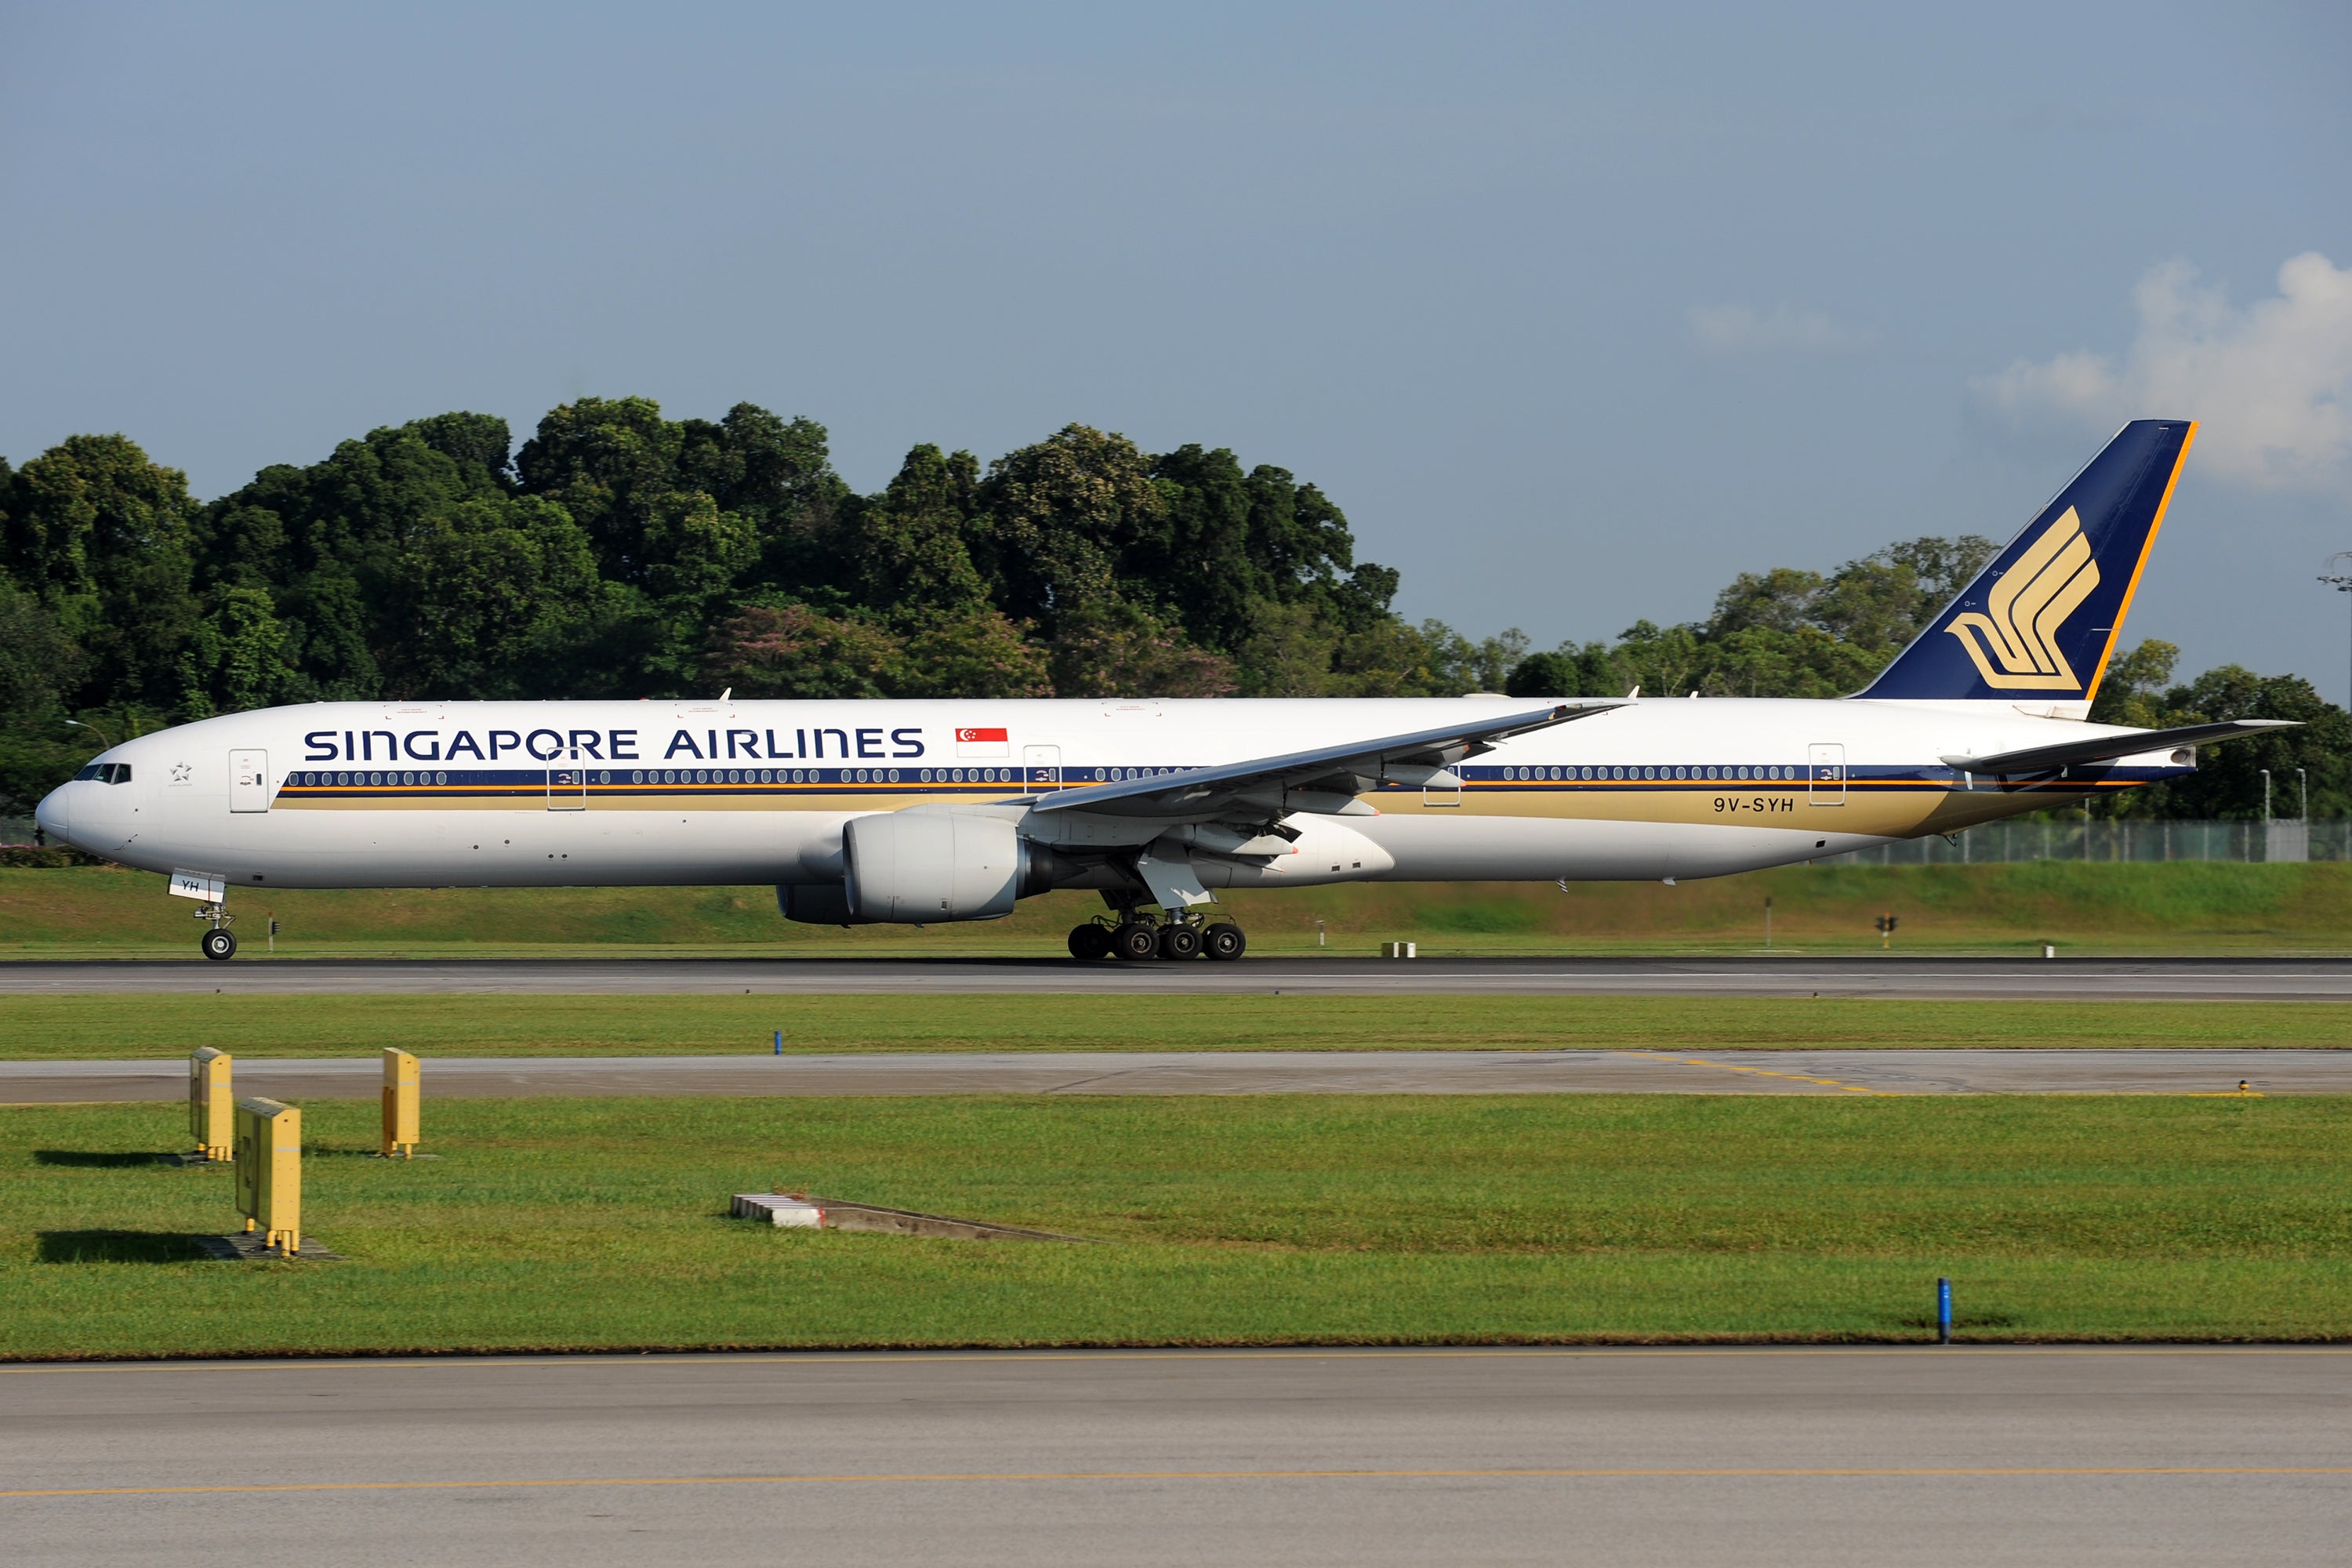 A Singapore Airlines Boeing 777-300